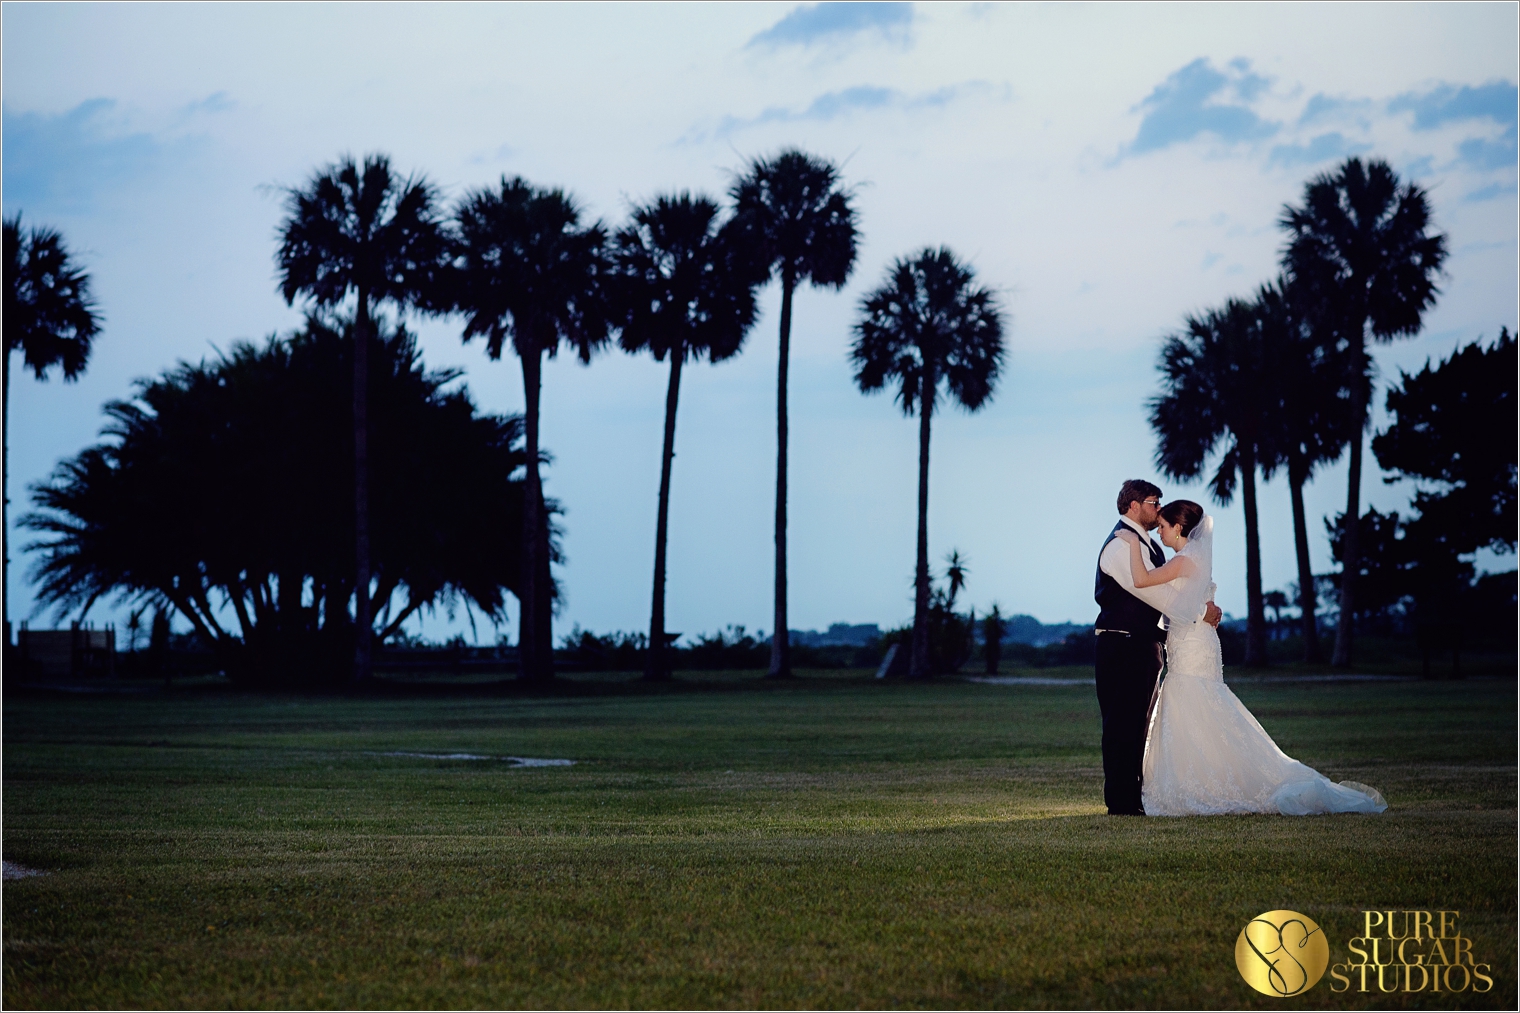 Pure Sugar Studios_St augustine wedding Photography_fountain of youth__0357.jpg